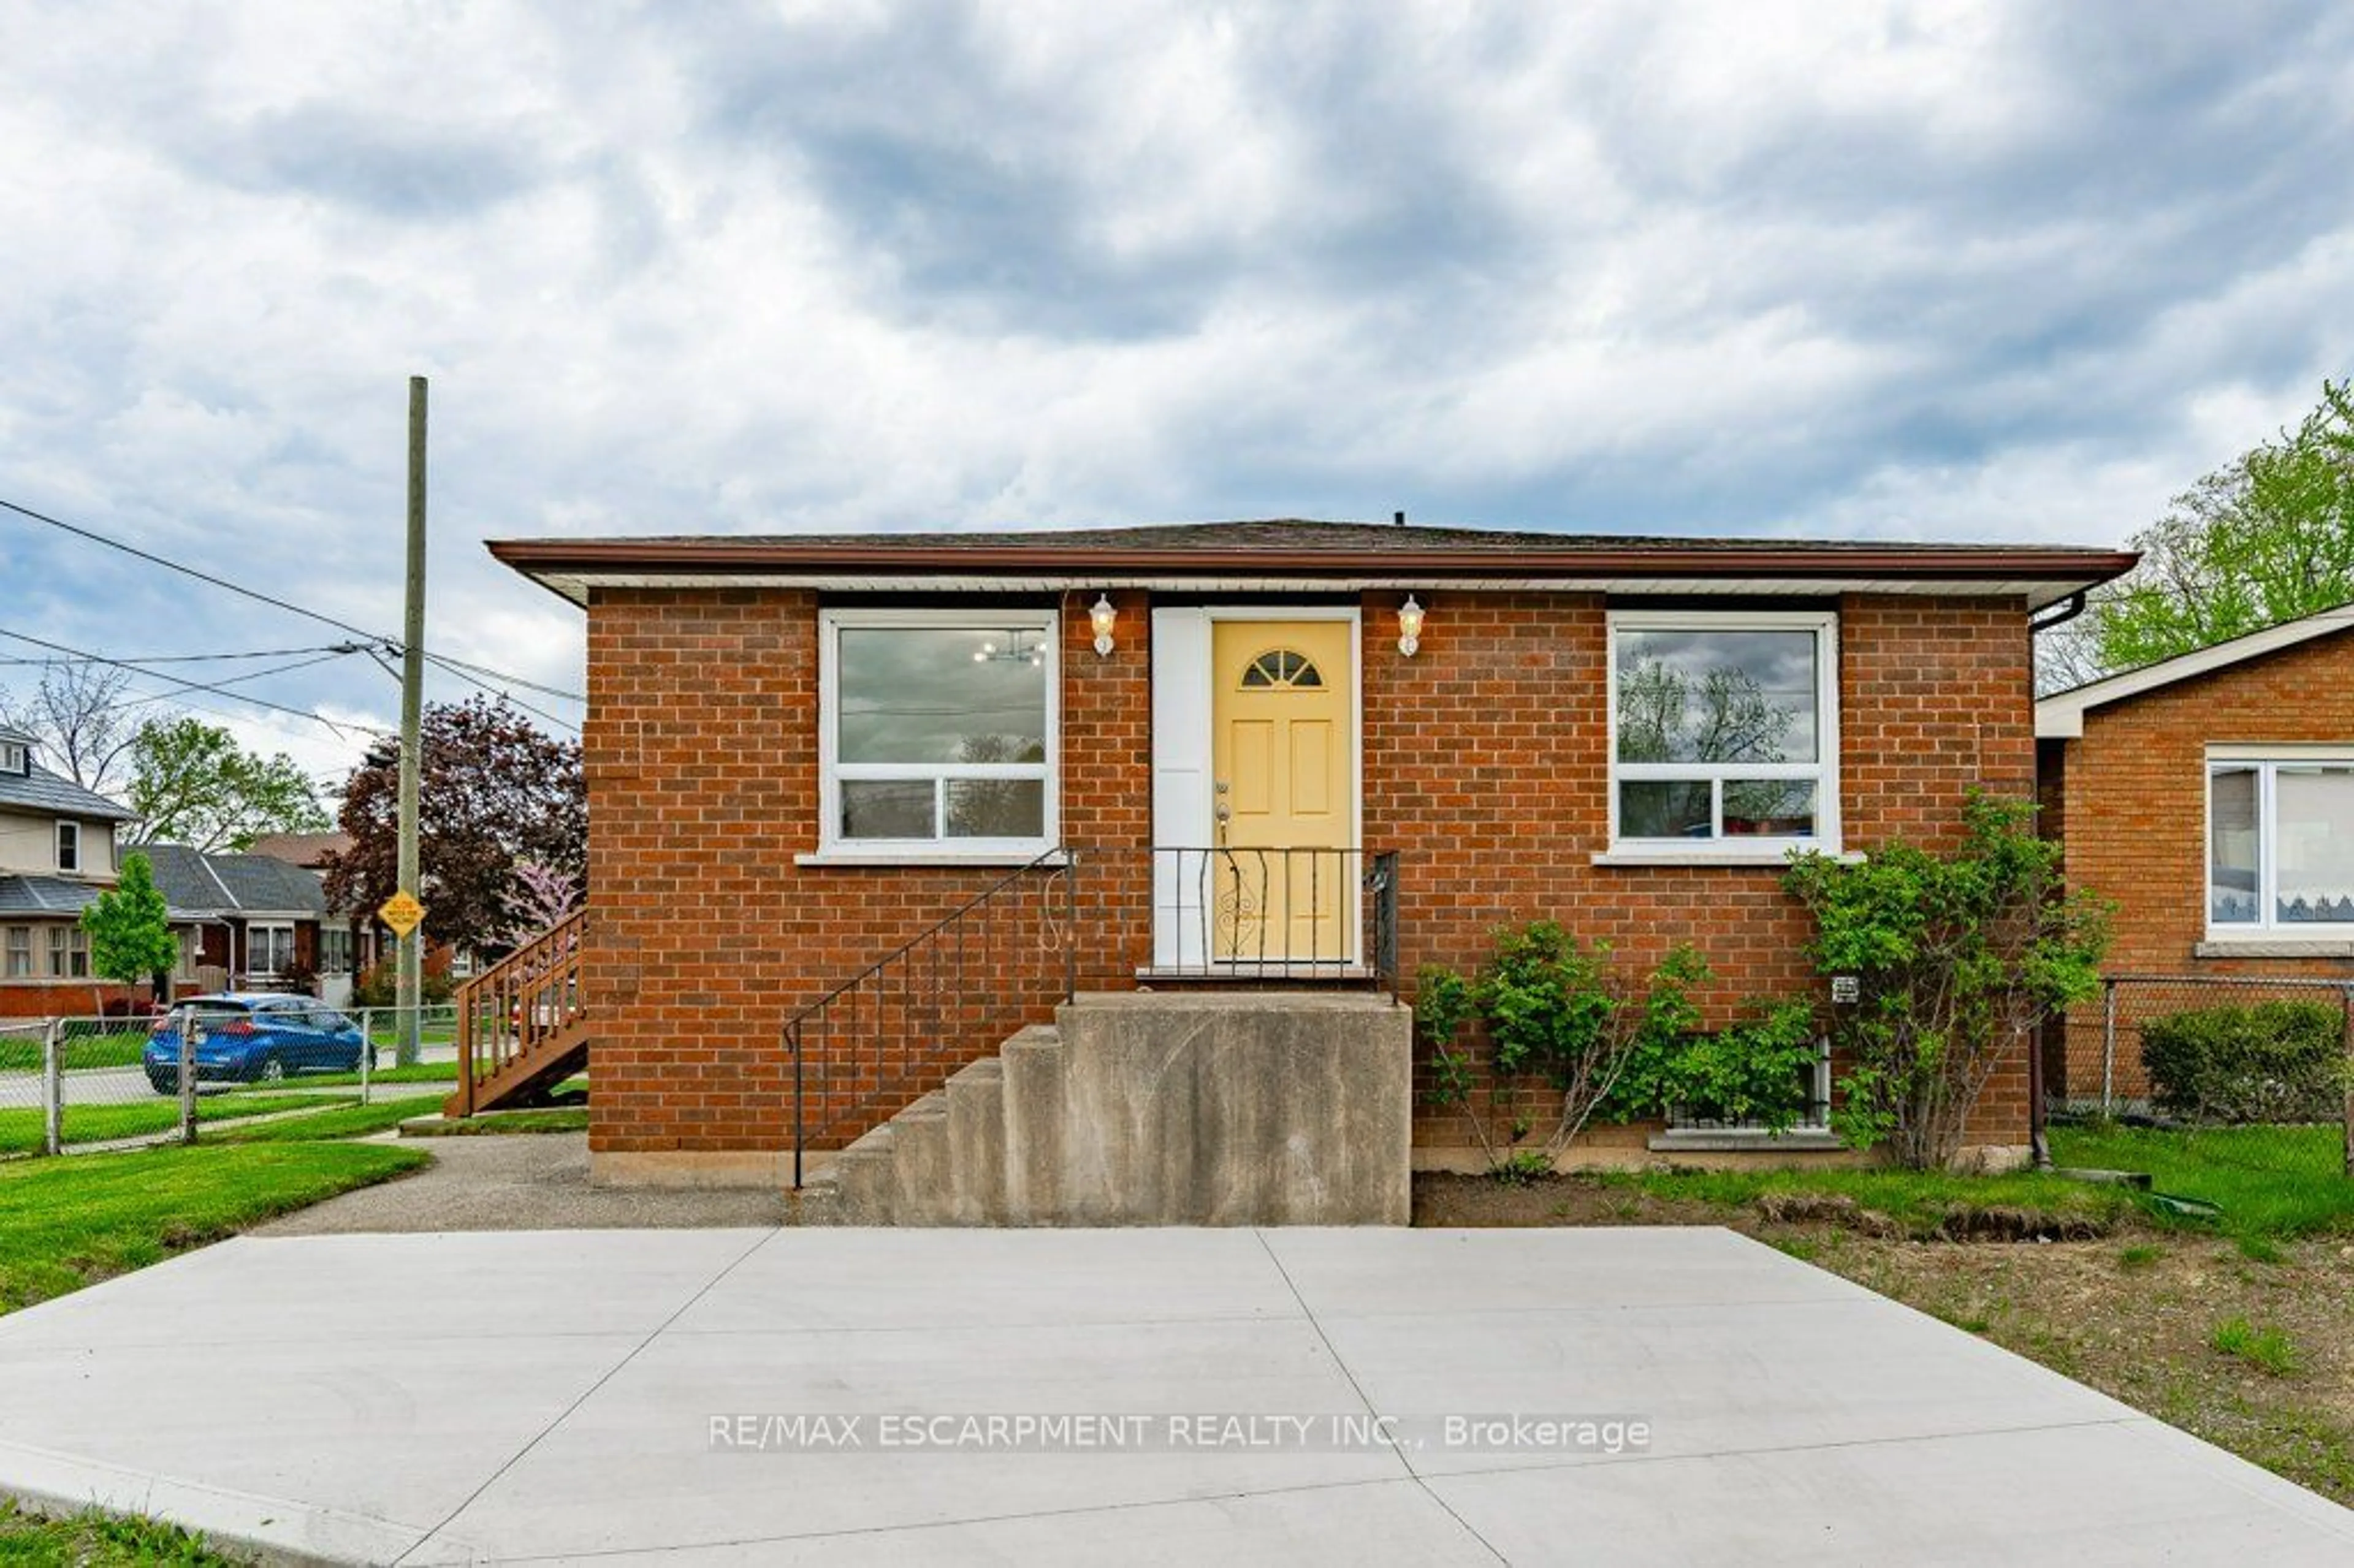 Home with brick exterior material for 44 Currie St, St. Catharines Ontario L2M 5M8